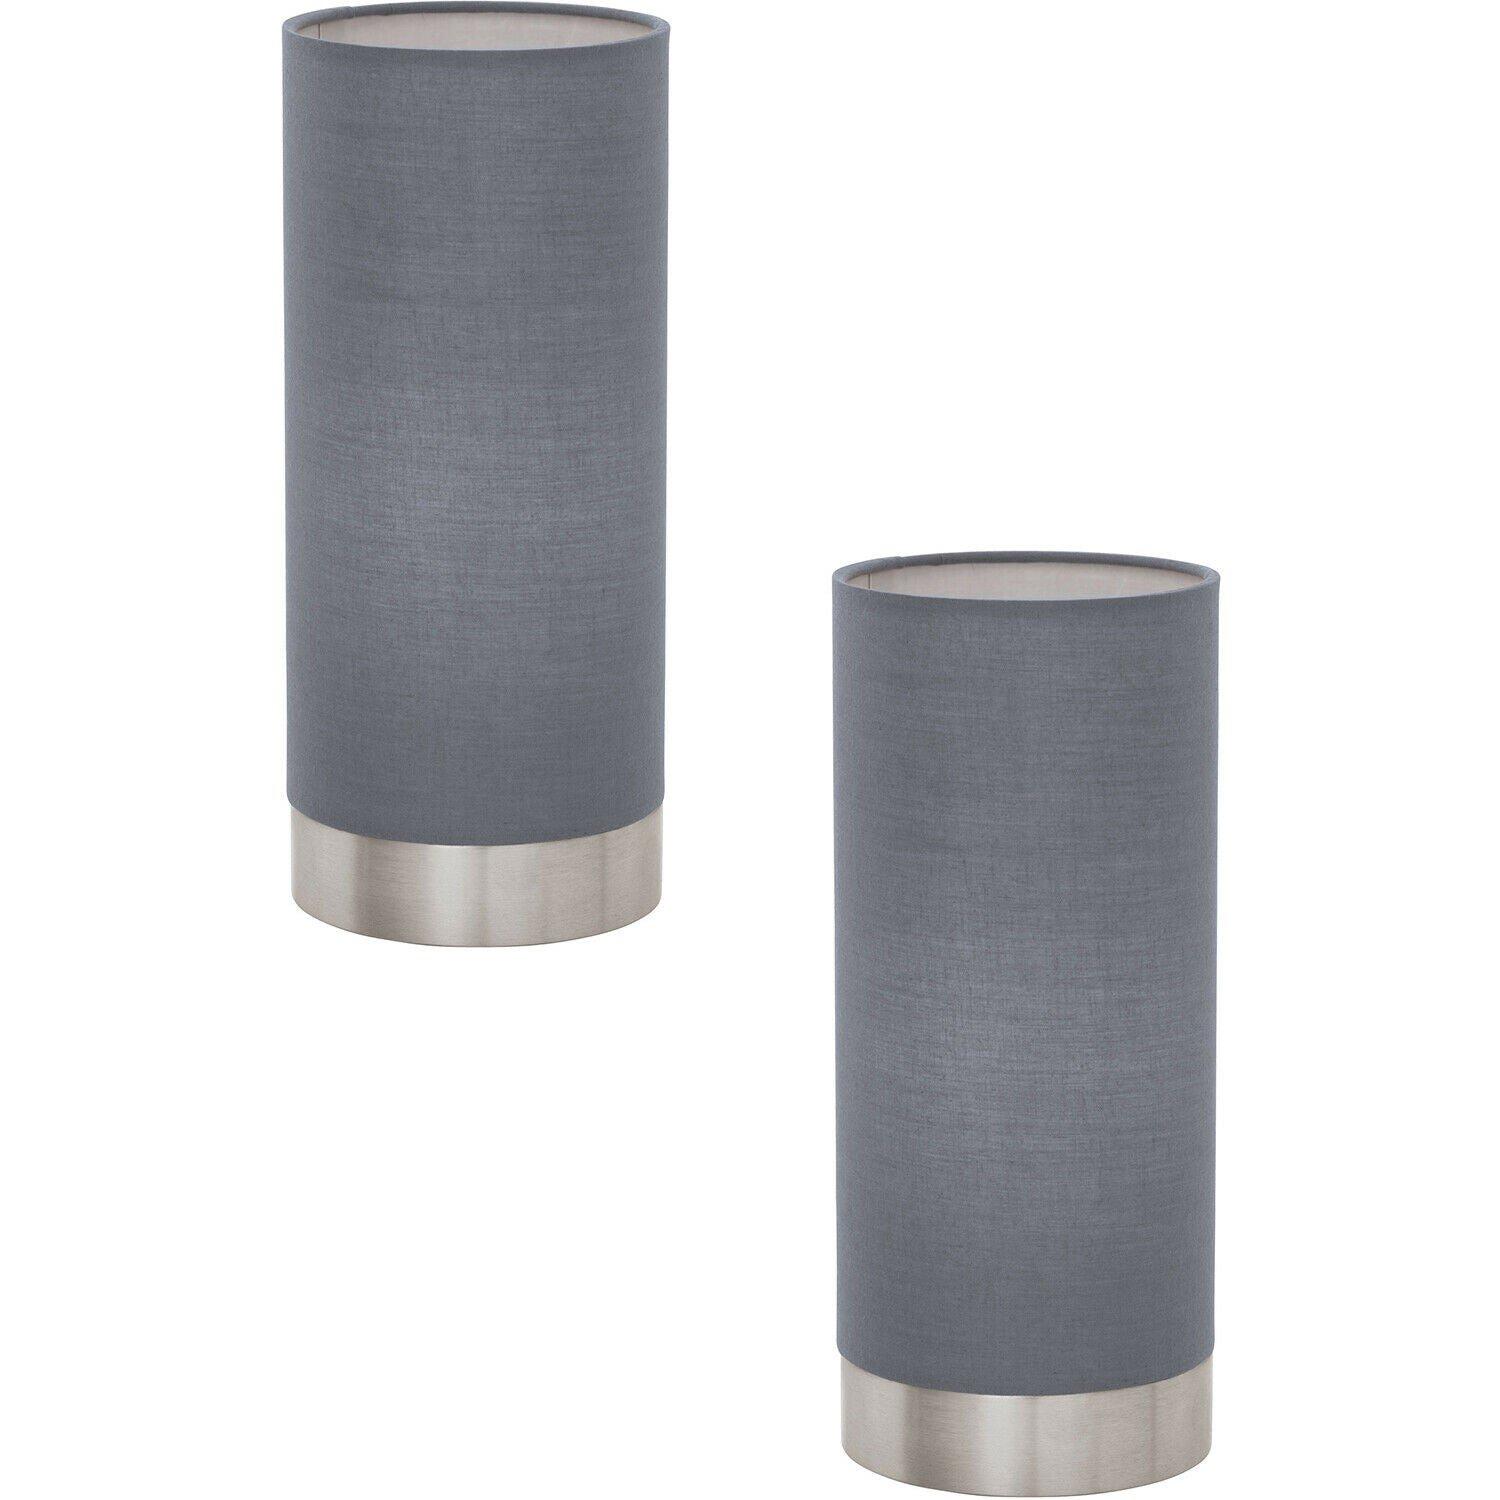 2 PACK Table Lamp Colour Satin Nickel Shade Grey Fabric Touch On/Off E27 1x40W